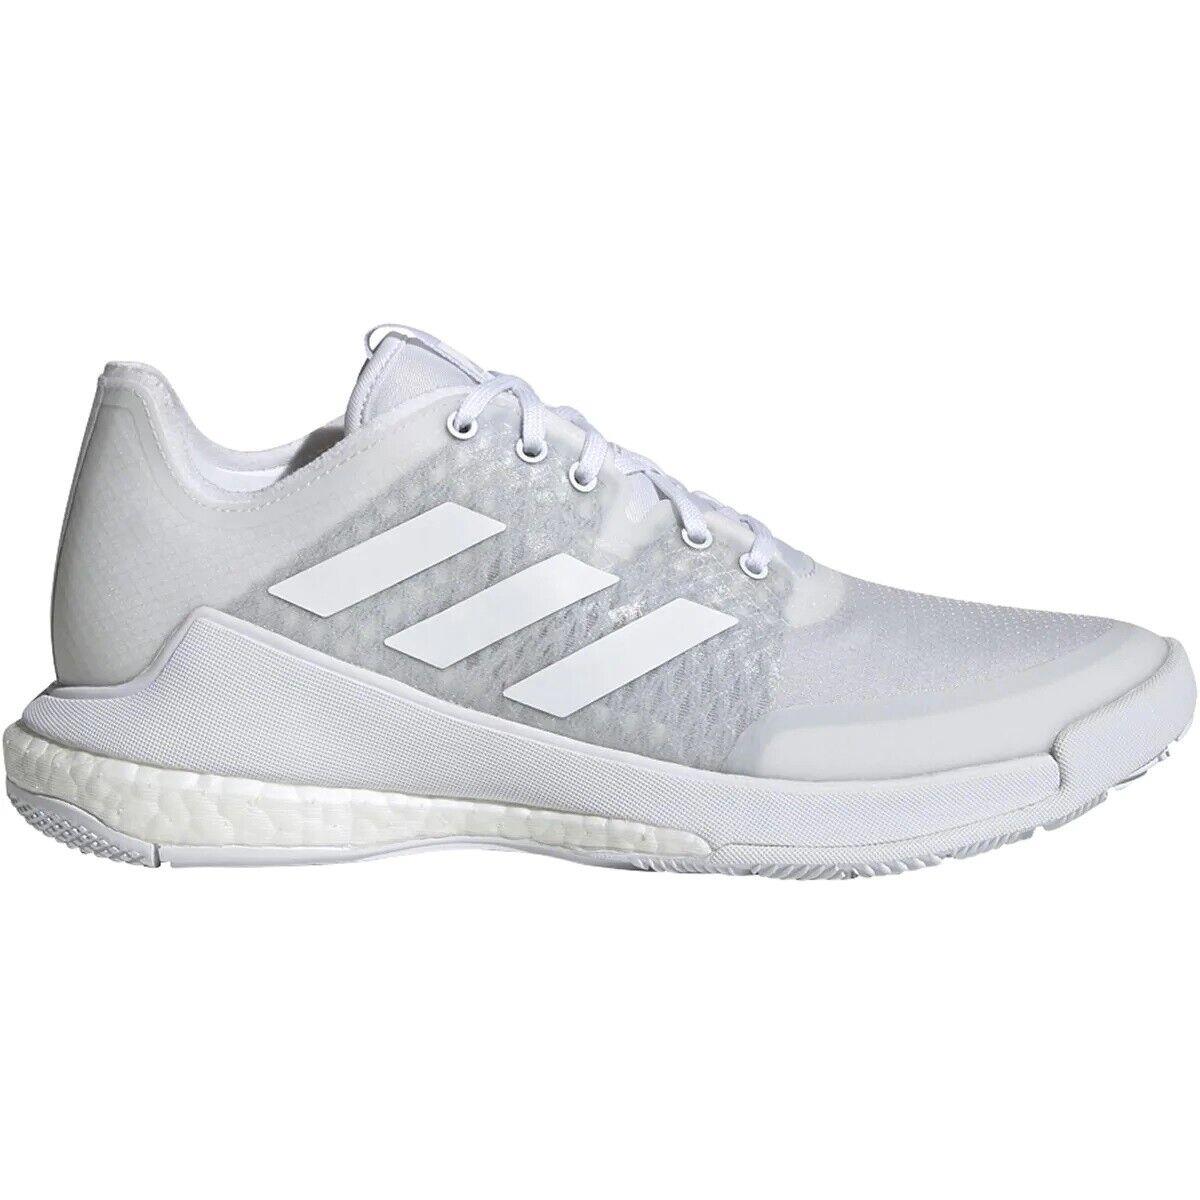 Adidas Crazyflight Volleyball Shoes EF2678 - Woman`s - 12.5 - White/grey